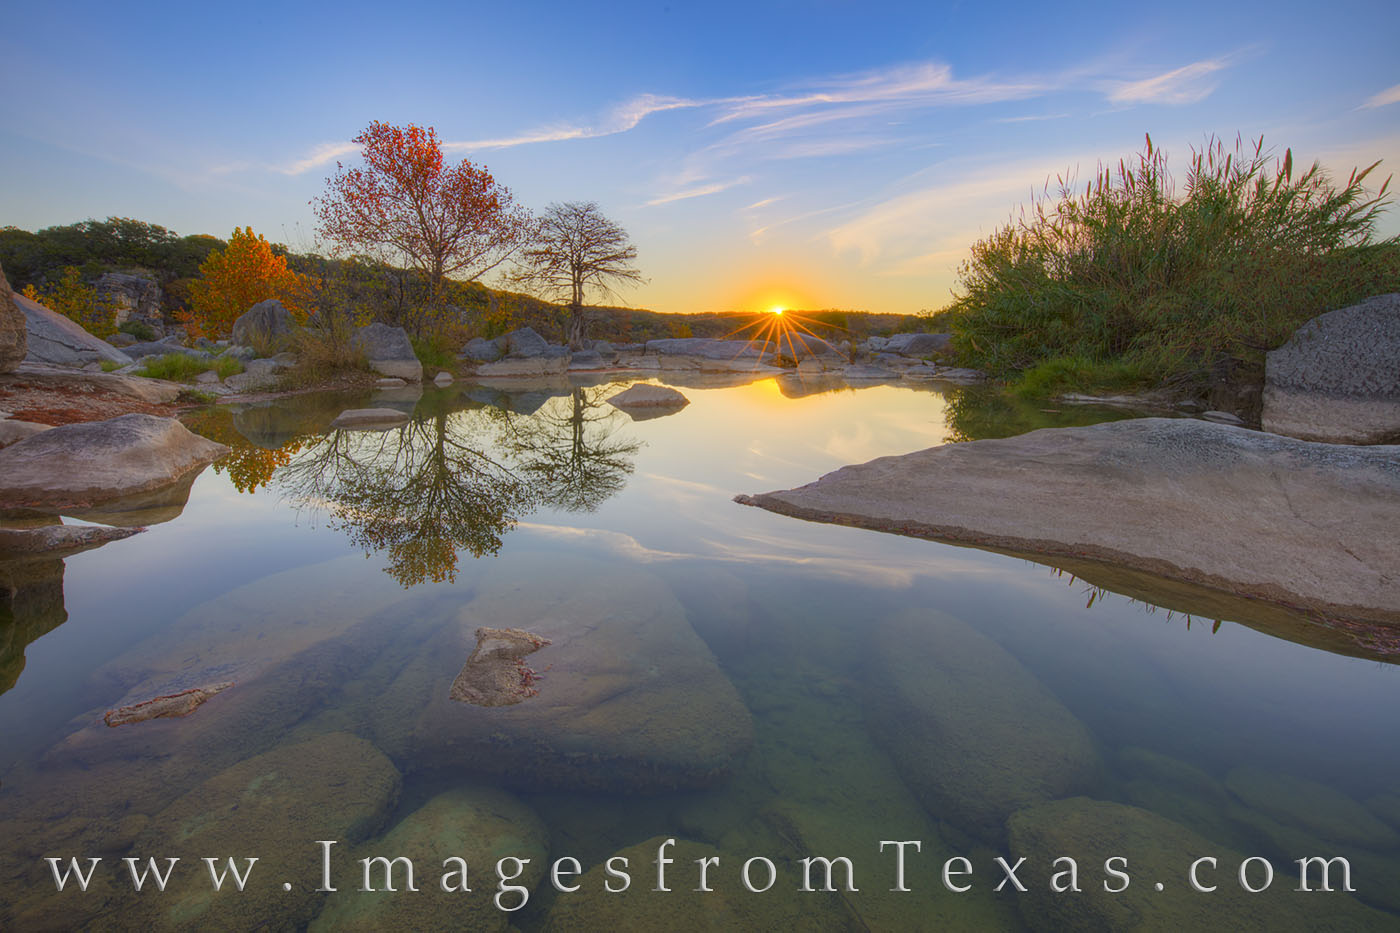 Sunlight glances off the tops of trees along the Pedernales River on a just-above-freezing November morning. The reflections...